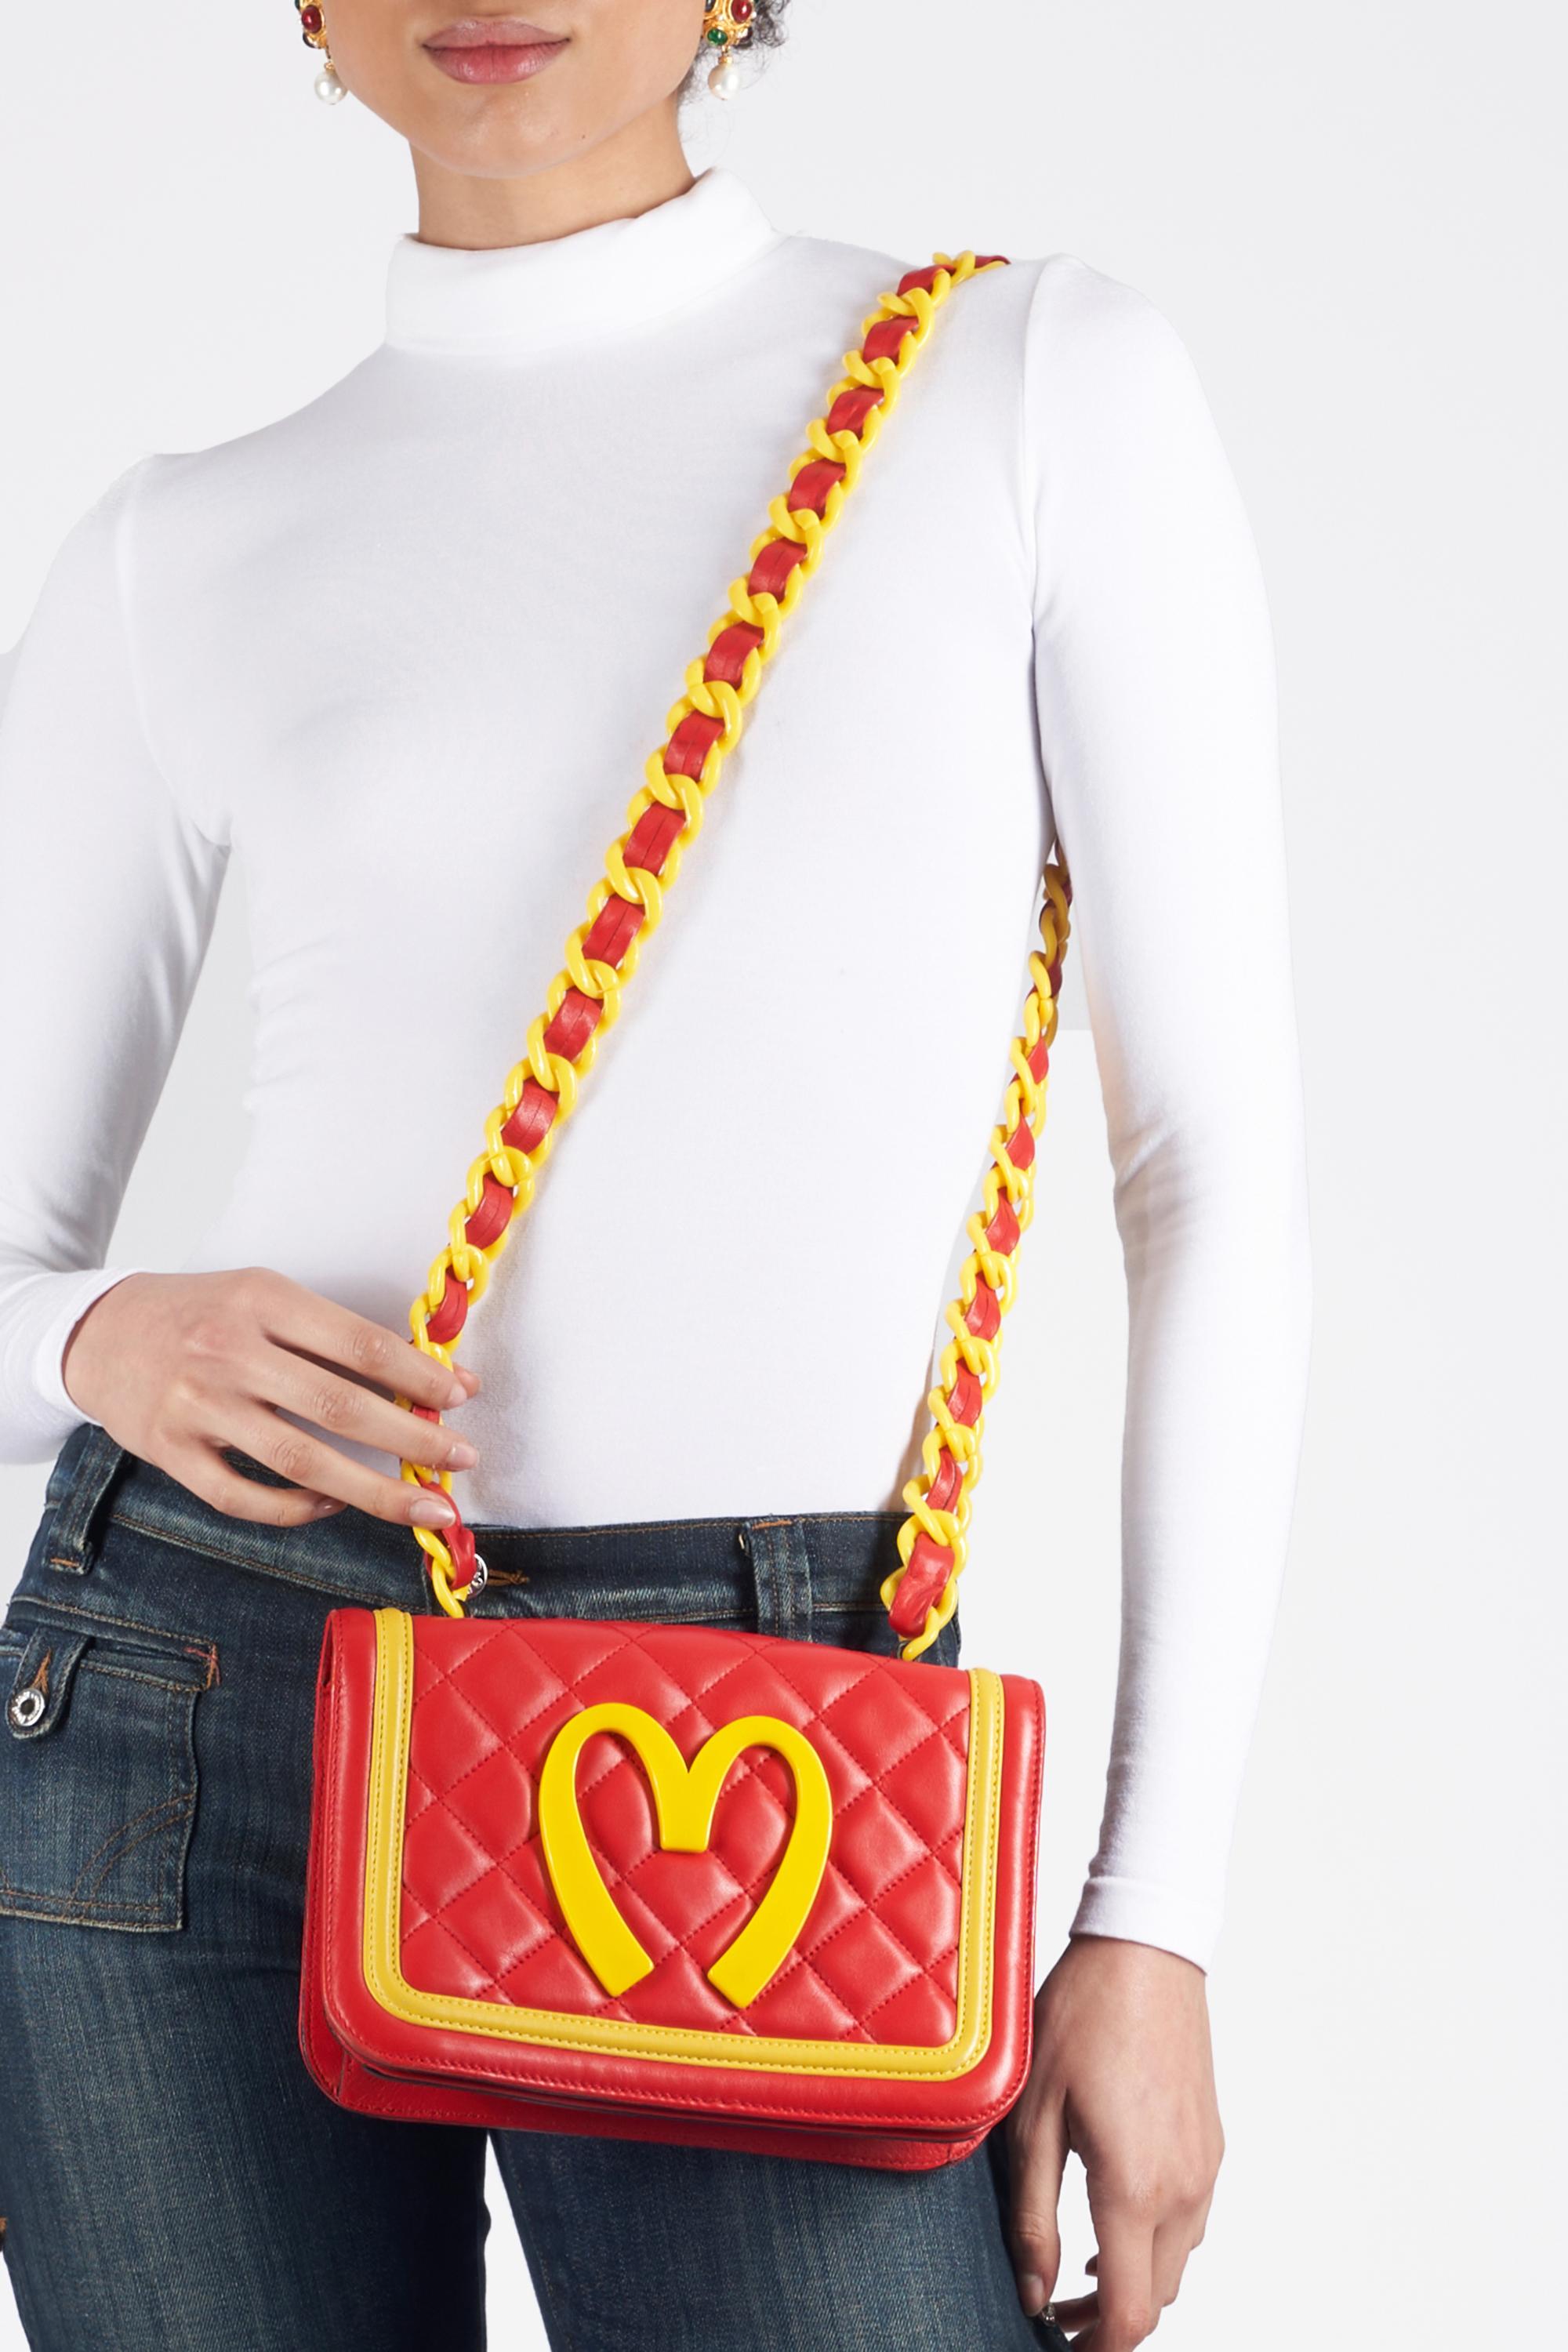 Moschino F/W 2014 McDonald's Leather Crossbody Bag For Sale 4